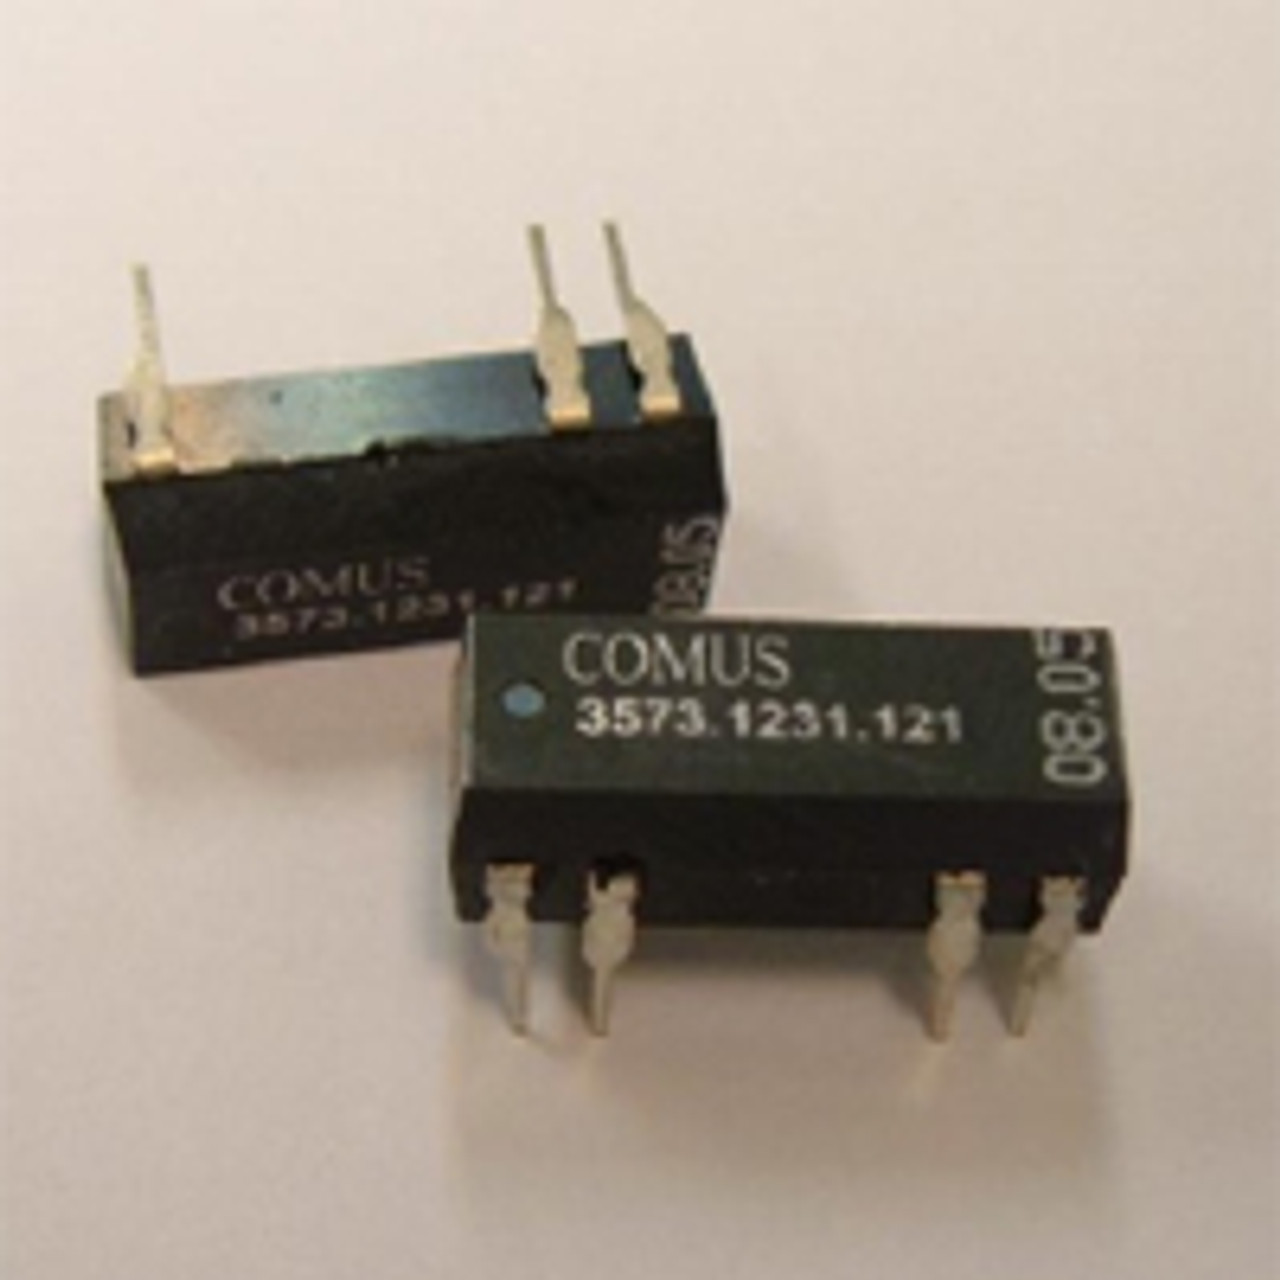 Comus 3565-1231-051 Reed Relays